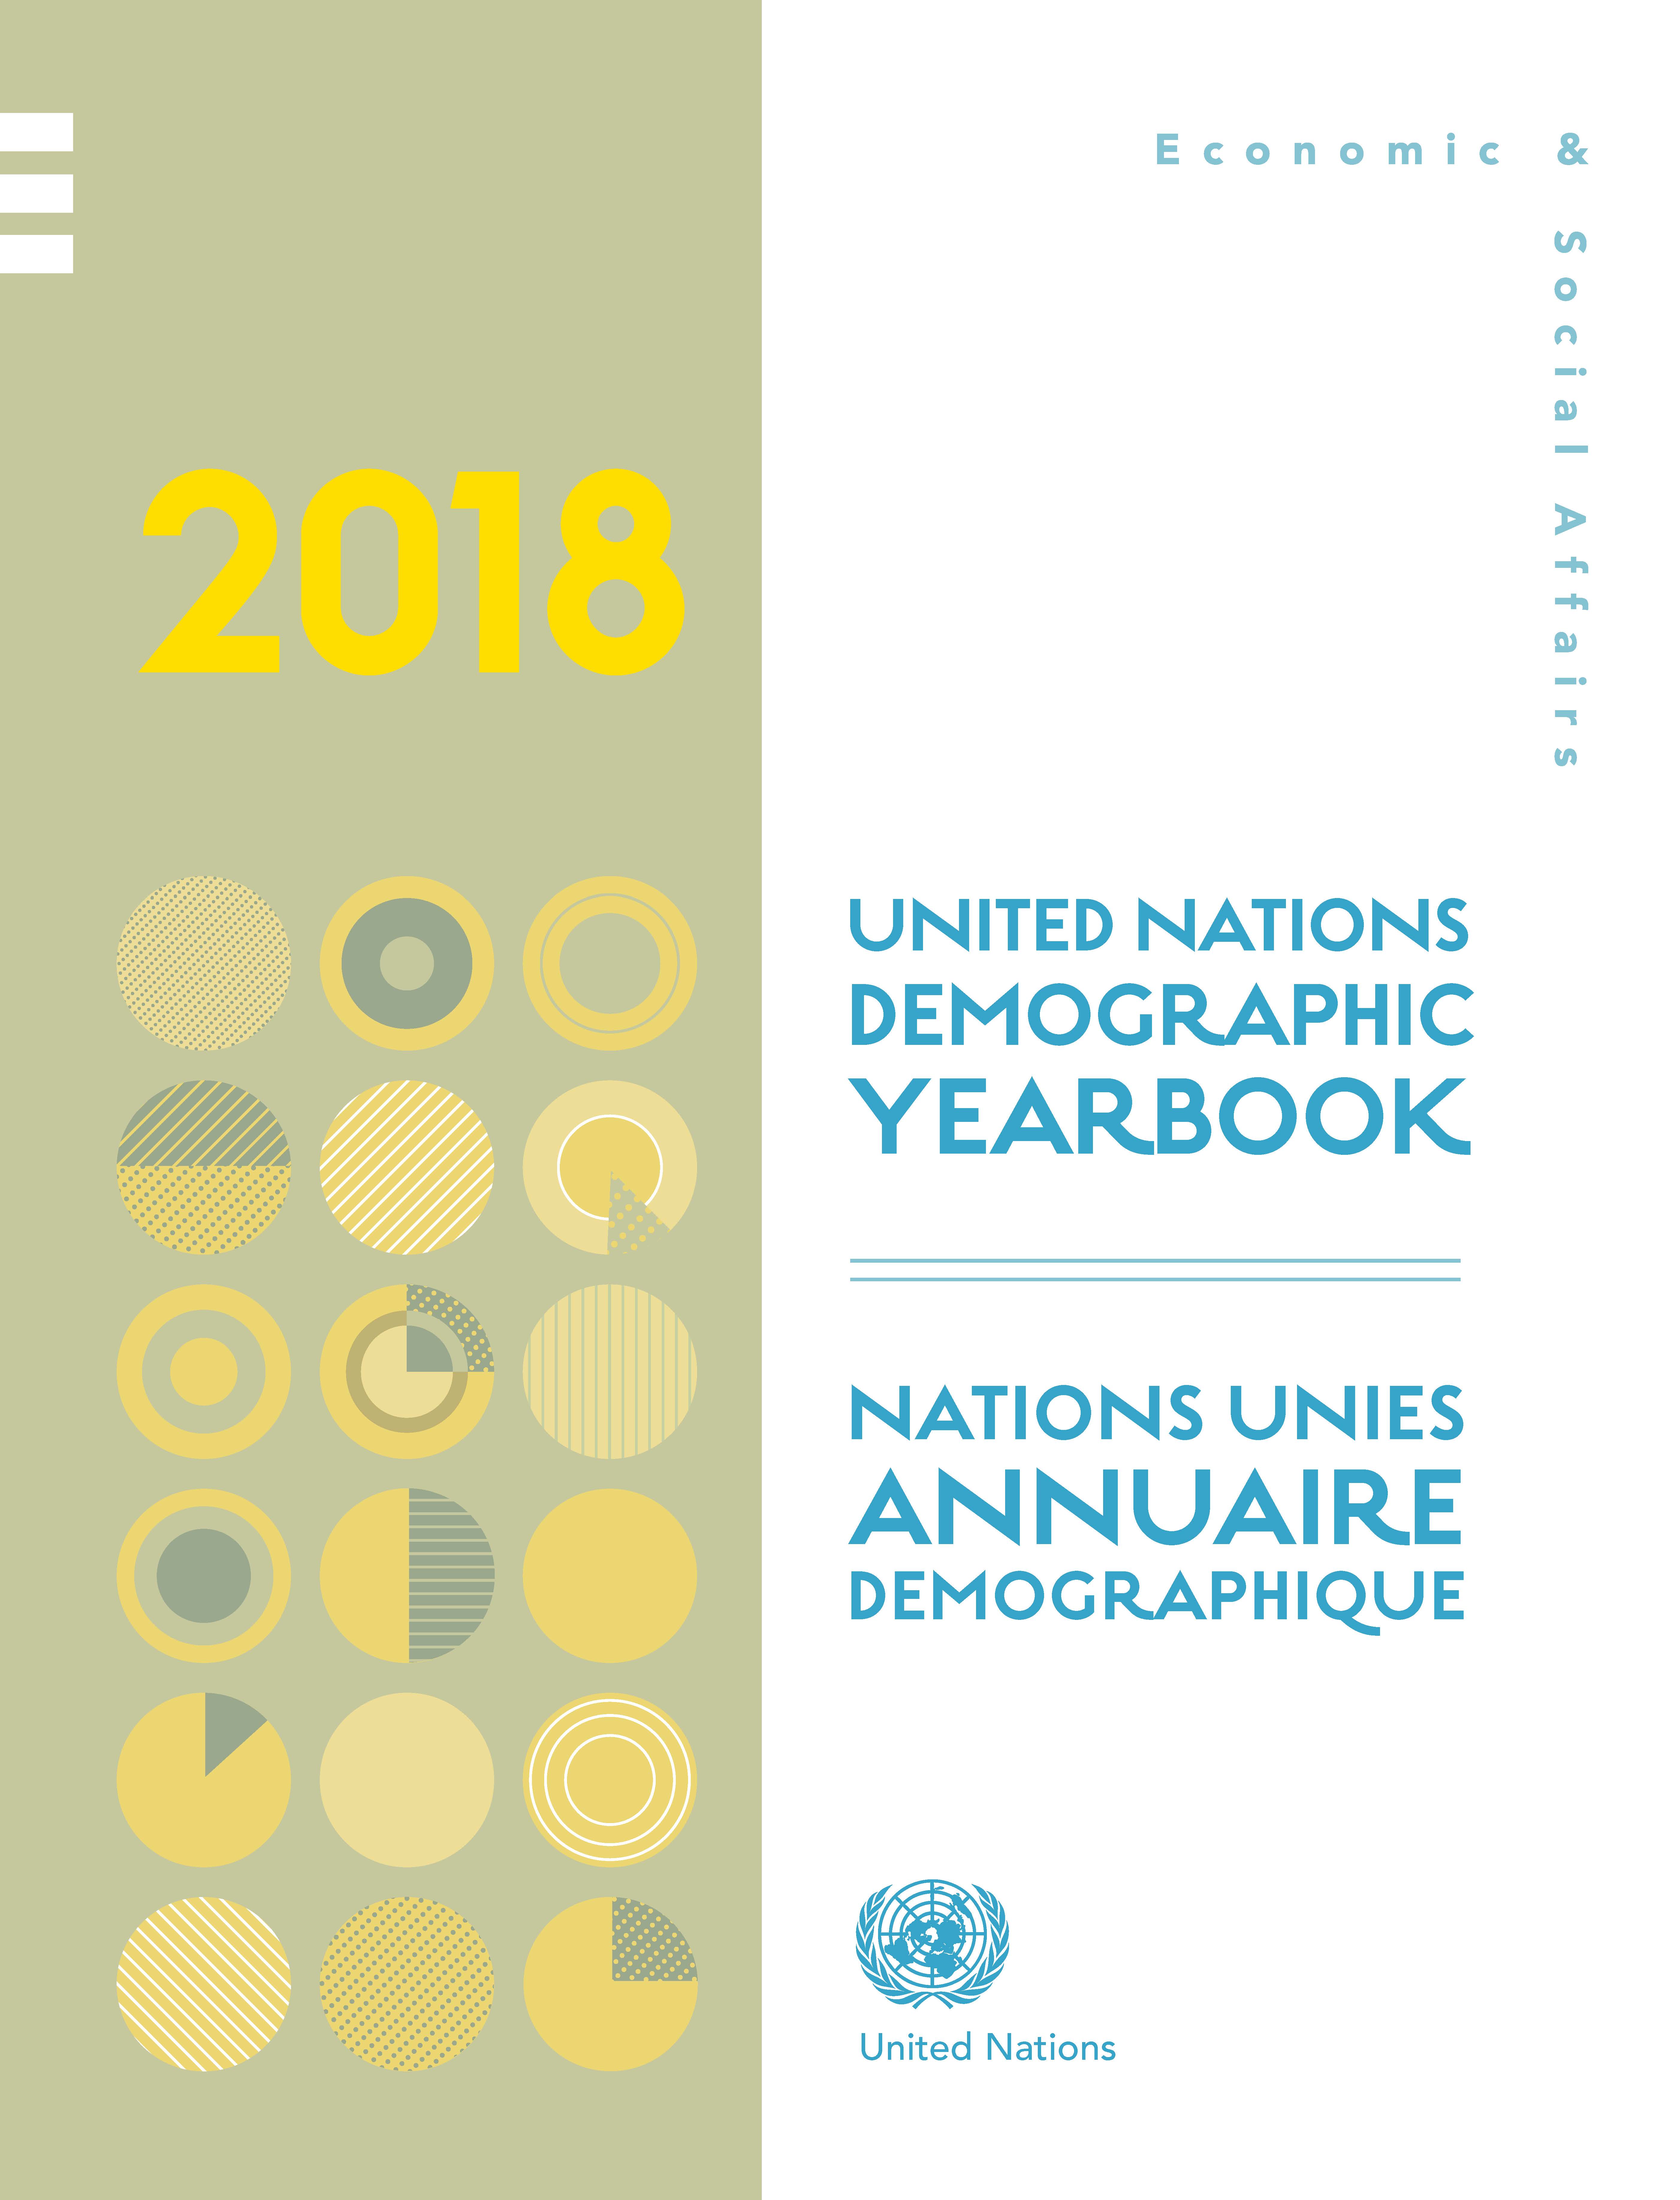 The United Nations Demographic Yearbook